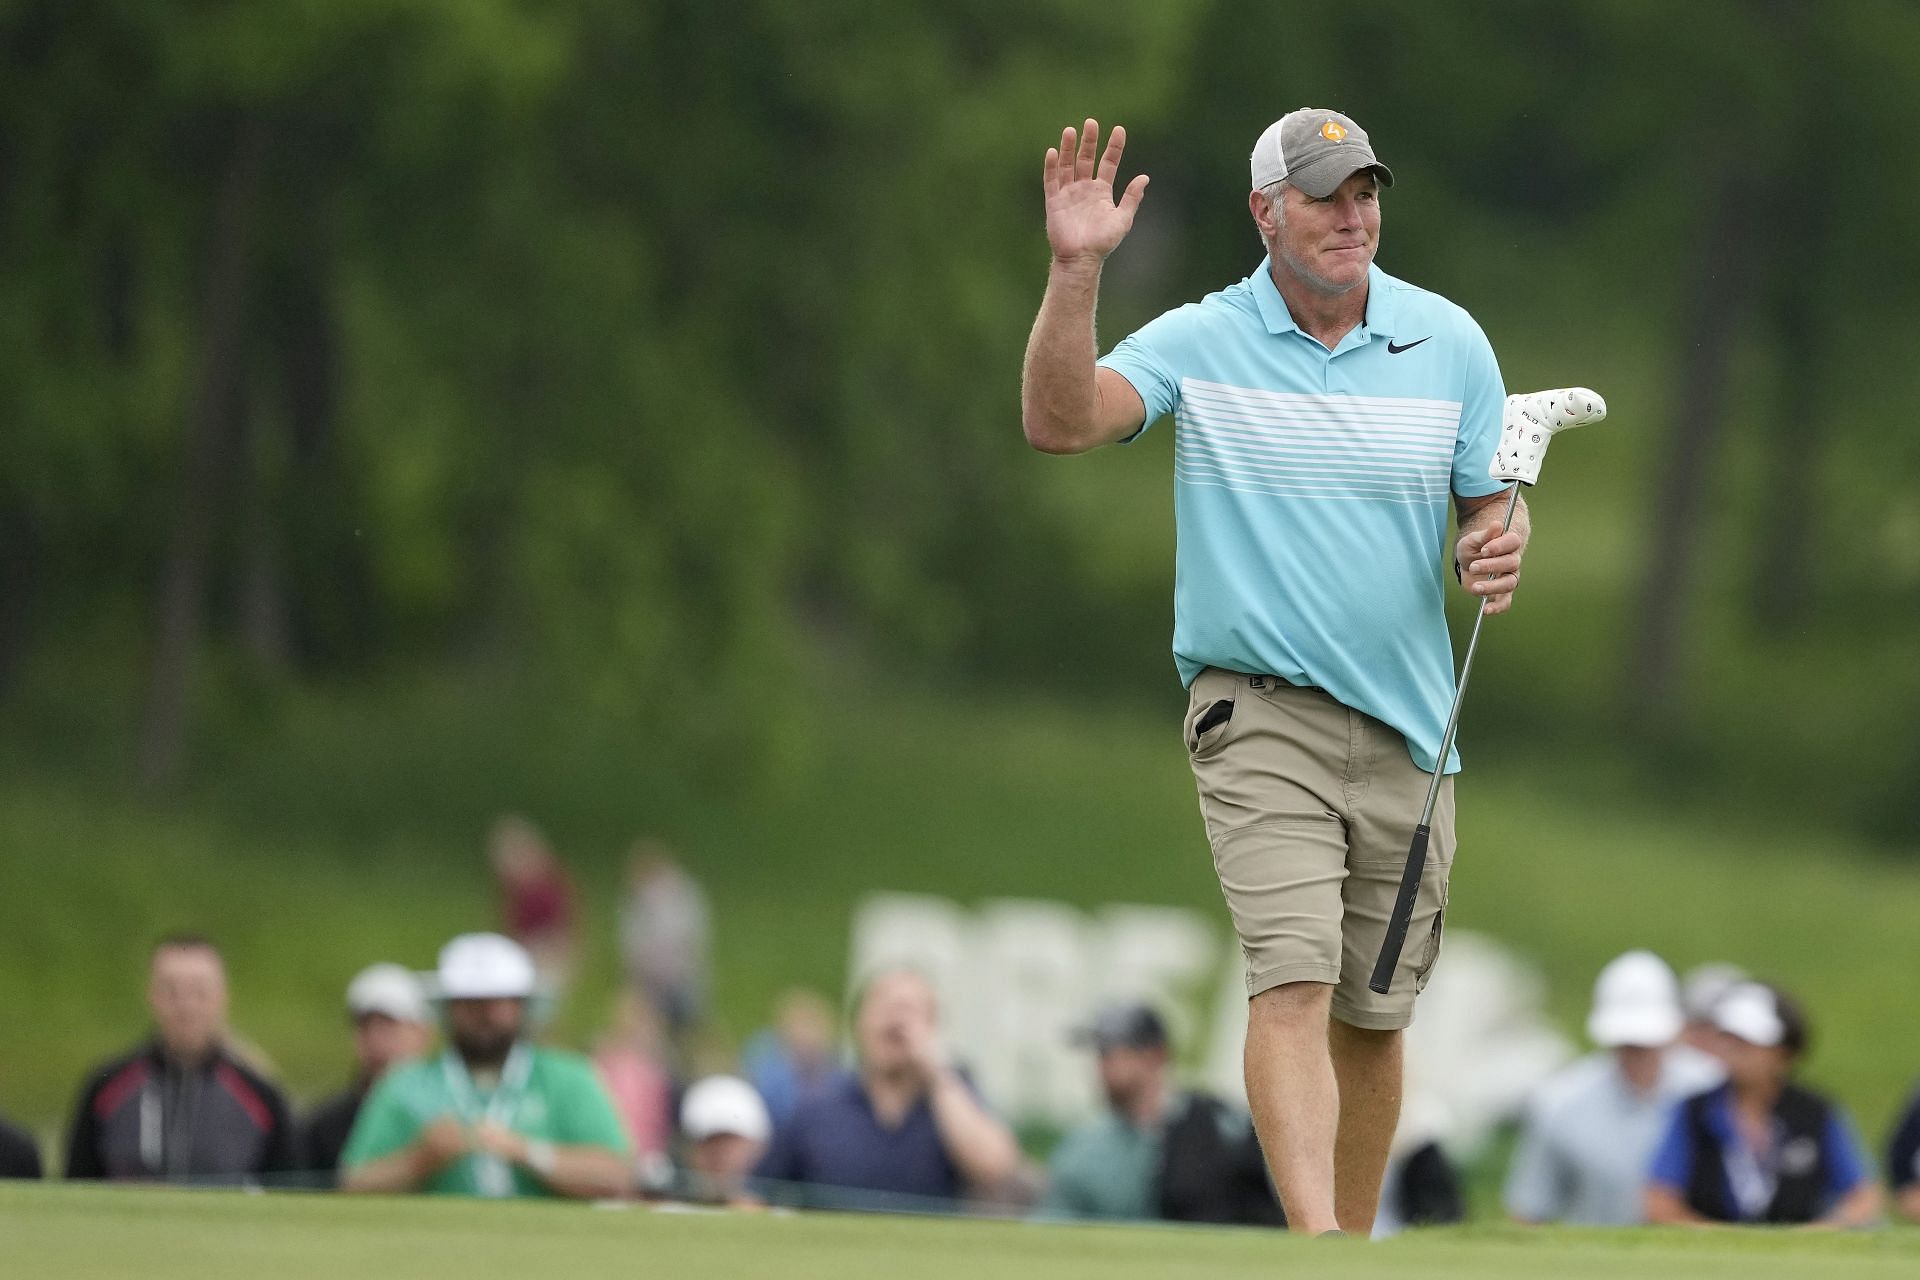 Brett Favre allegedly asked for money to build a volleyball stadium